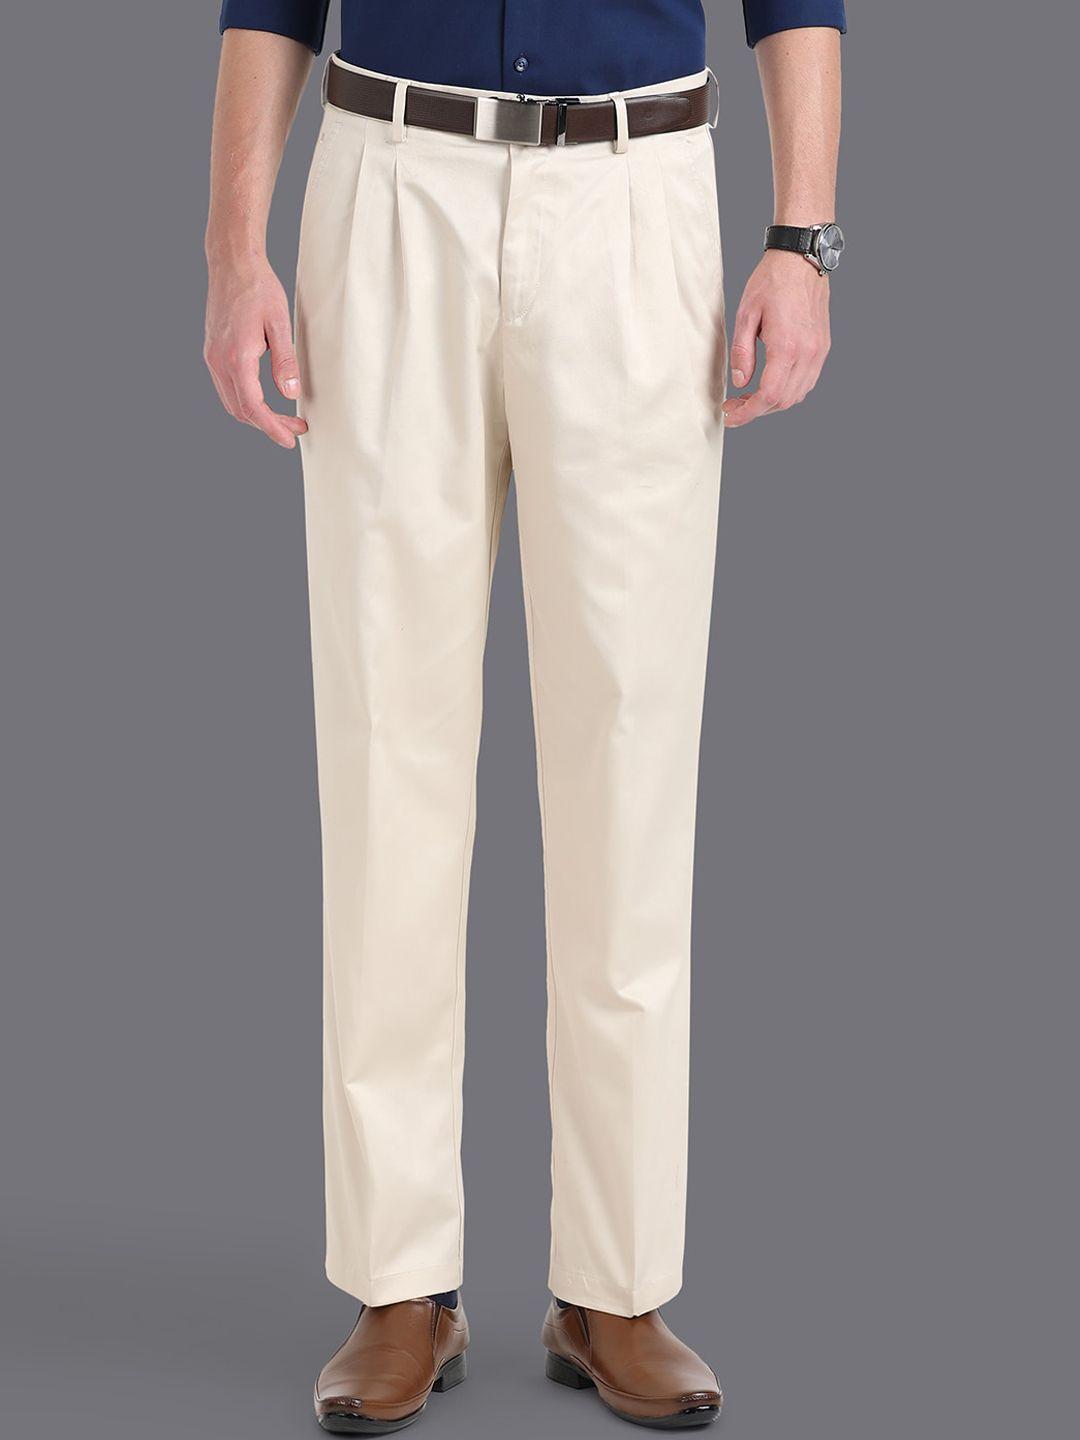 louis philippe men slim fit mid-rise pleated pure cotton formal trousers